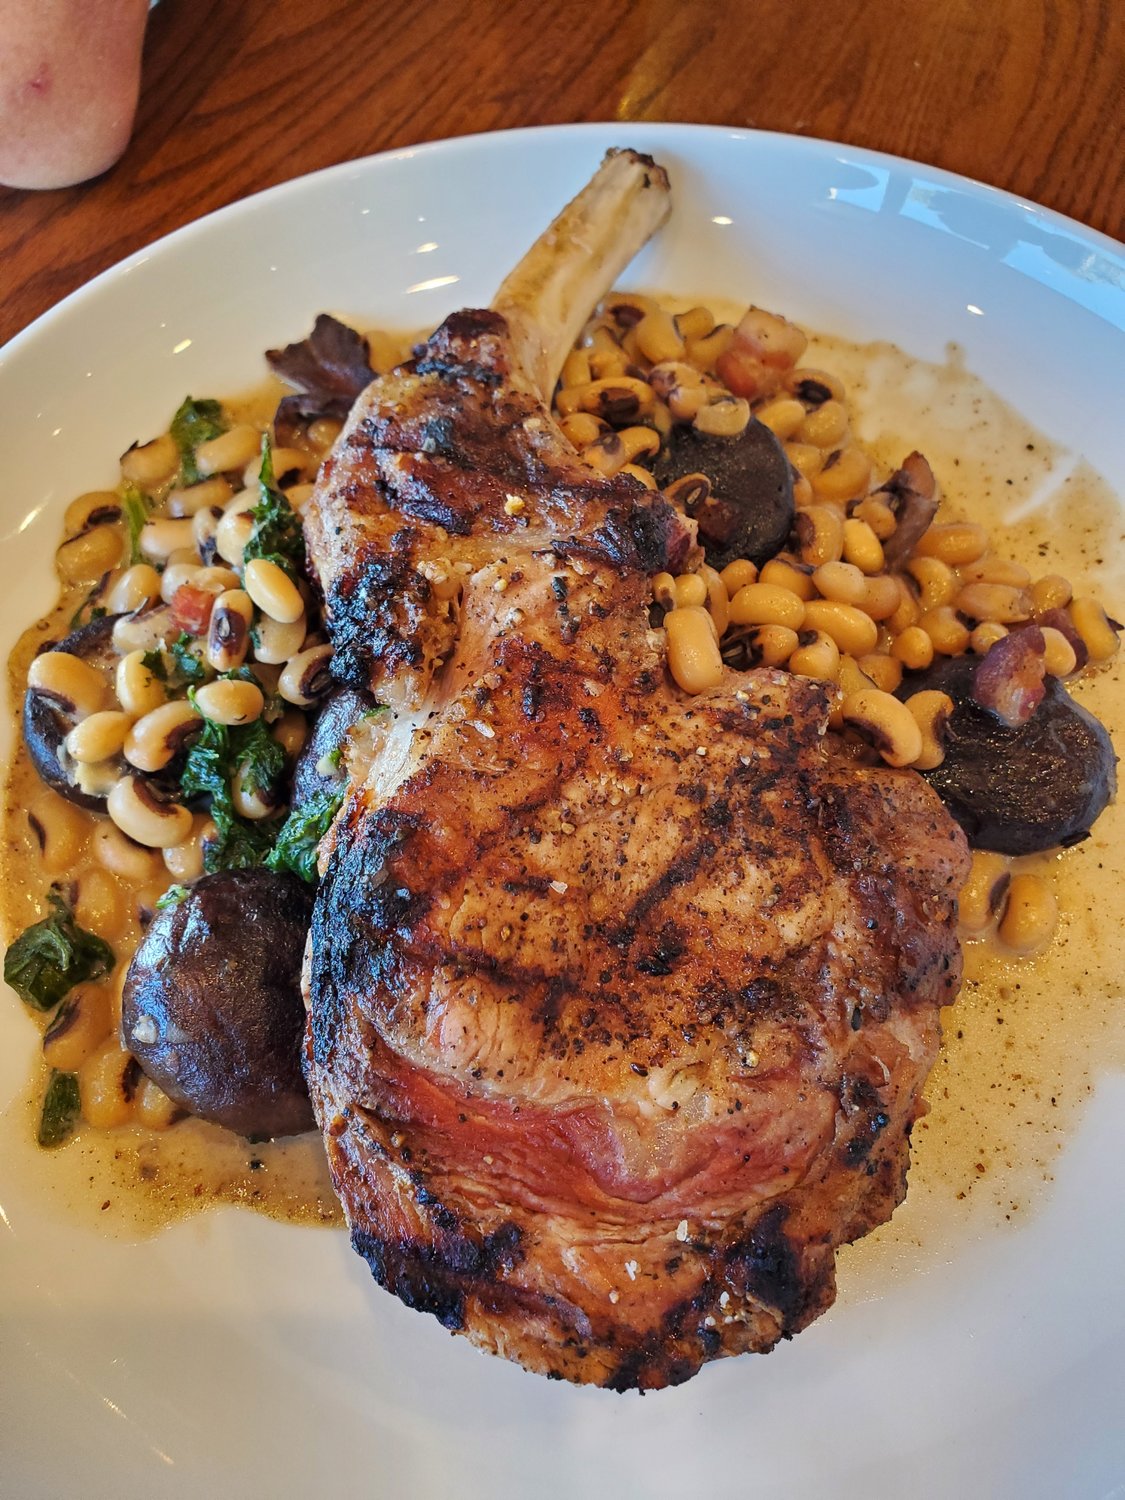 The grilled bone-in pork chop will make diners forget everything but the dish before them.